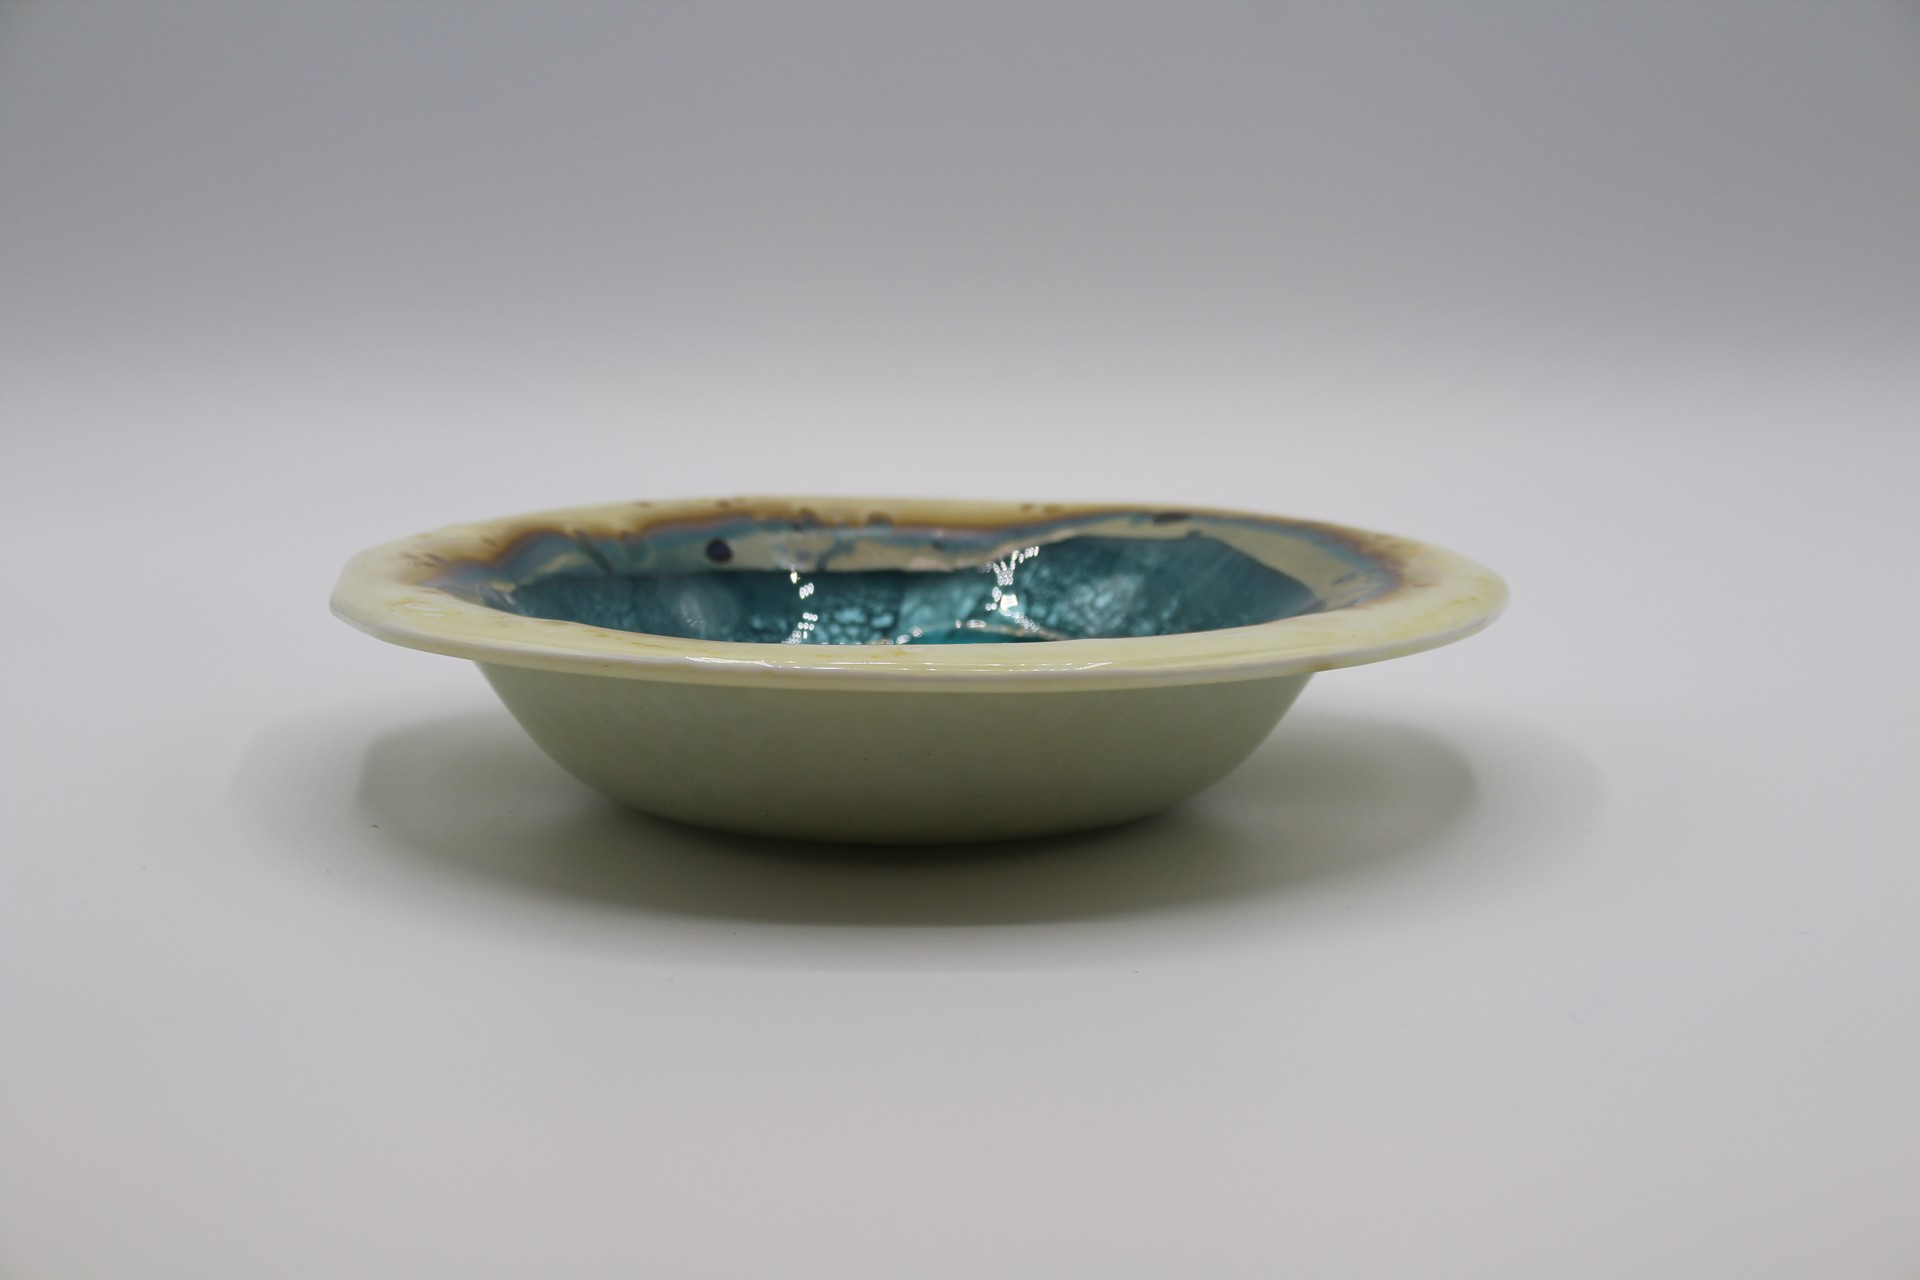 Heart Spring Bowl (6") by Kathy Burk